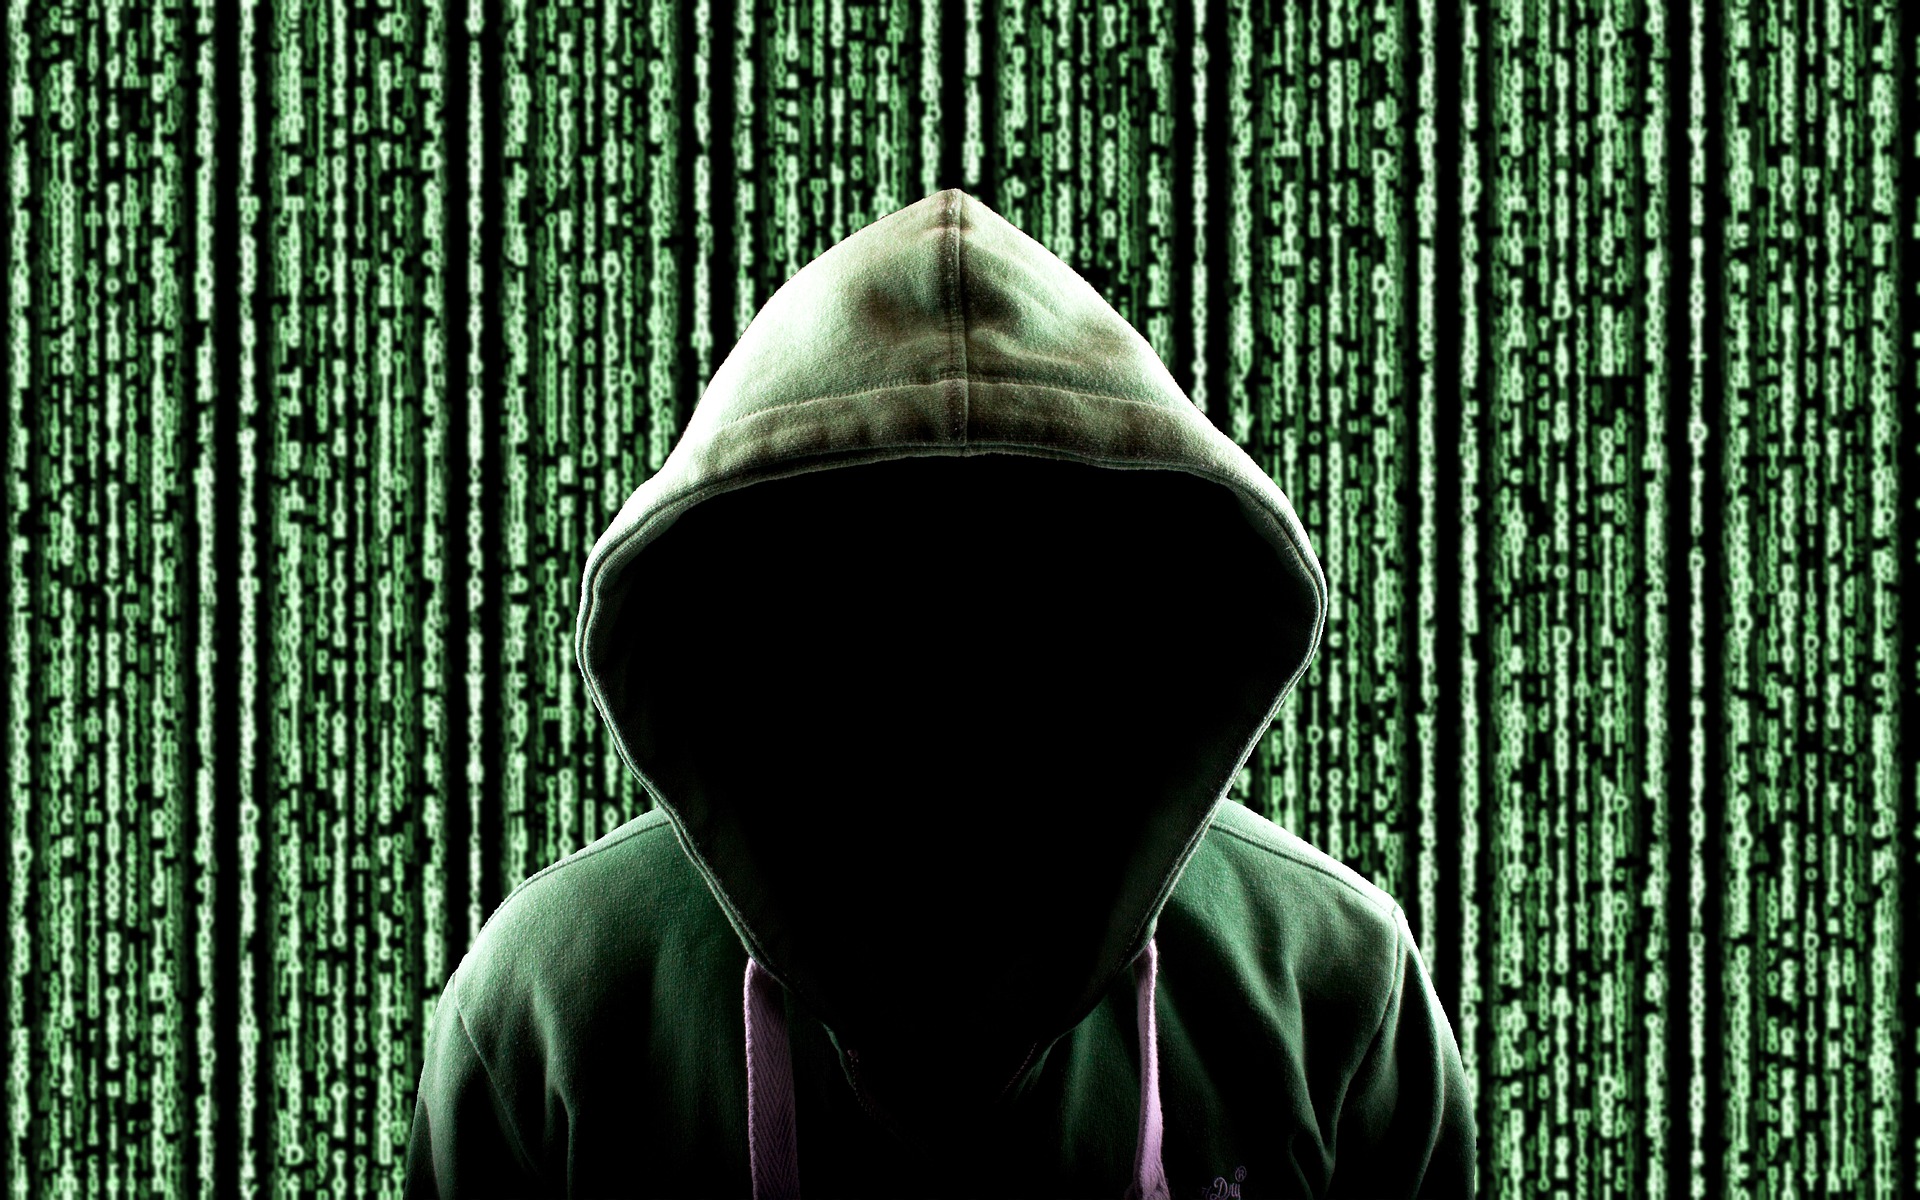 A person in a green hoodie with the hood up, obscuring their face in darkness, stands in front of a background featuring vertical green lines of digital code.